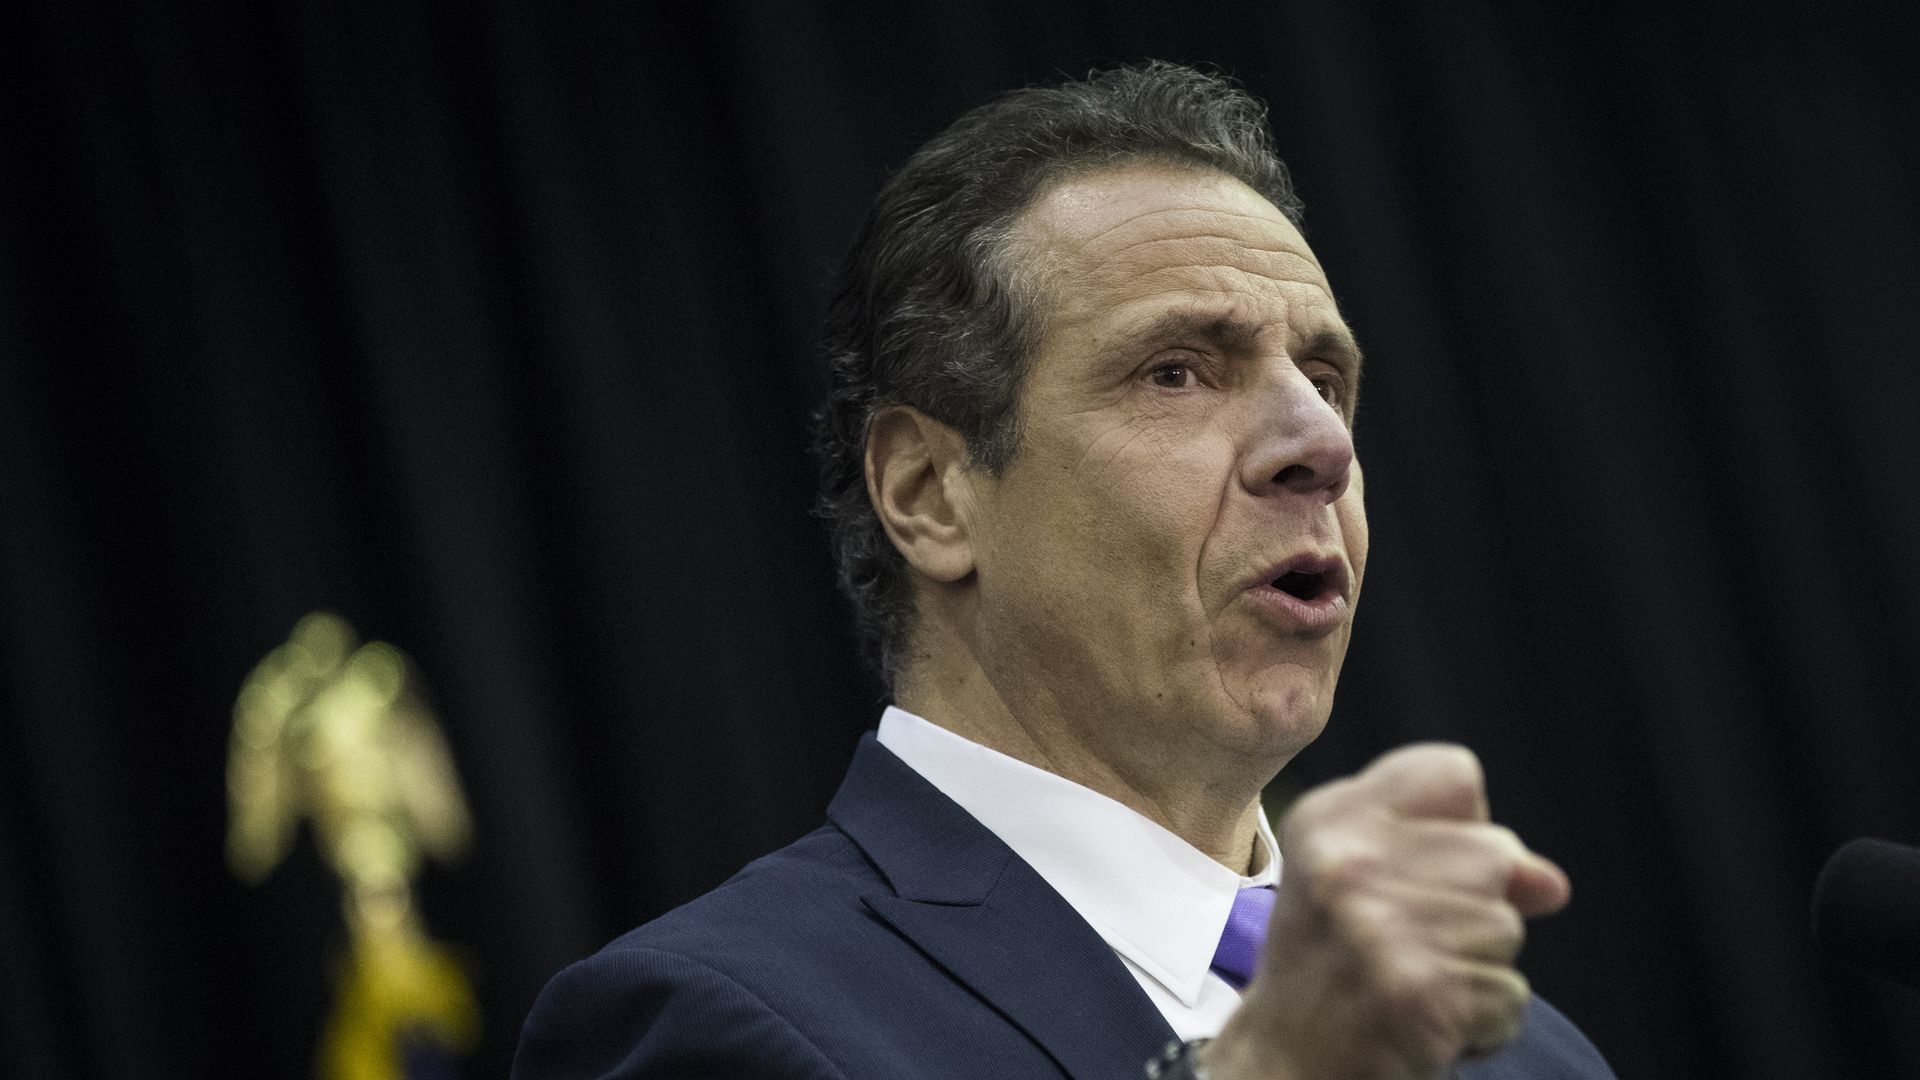  New York Governor Andrew Cuomo speaks during a bill signing event at John Jay College